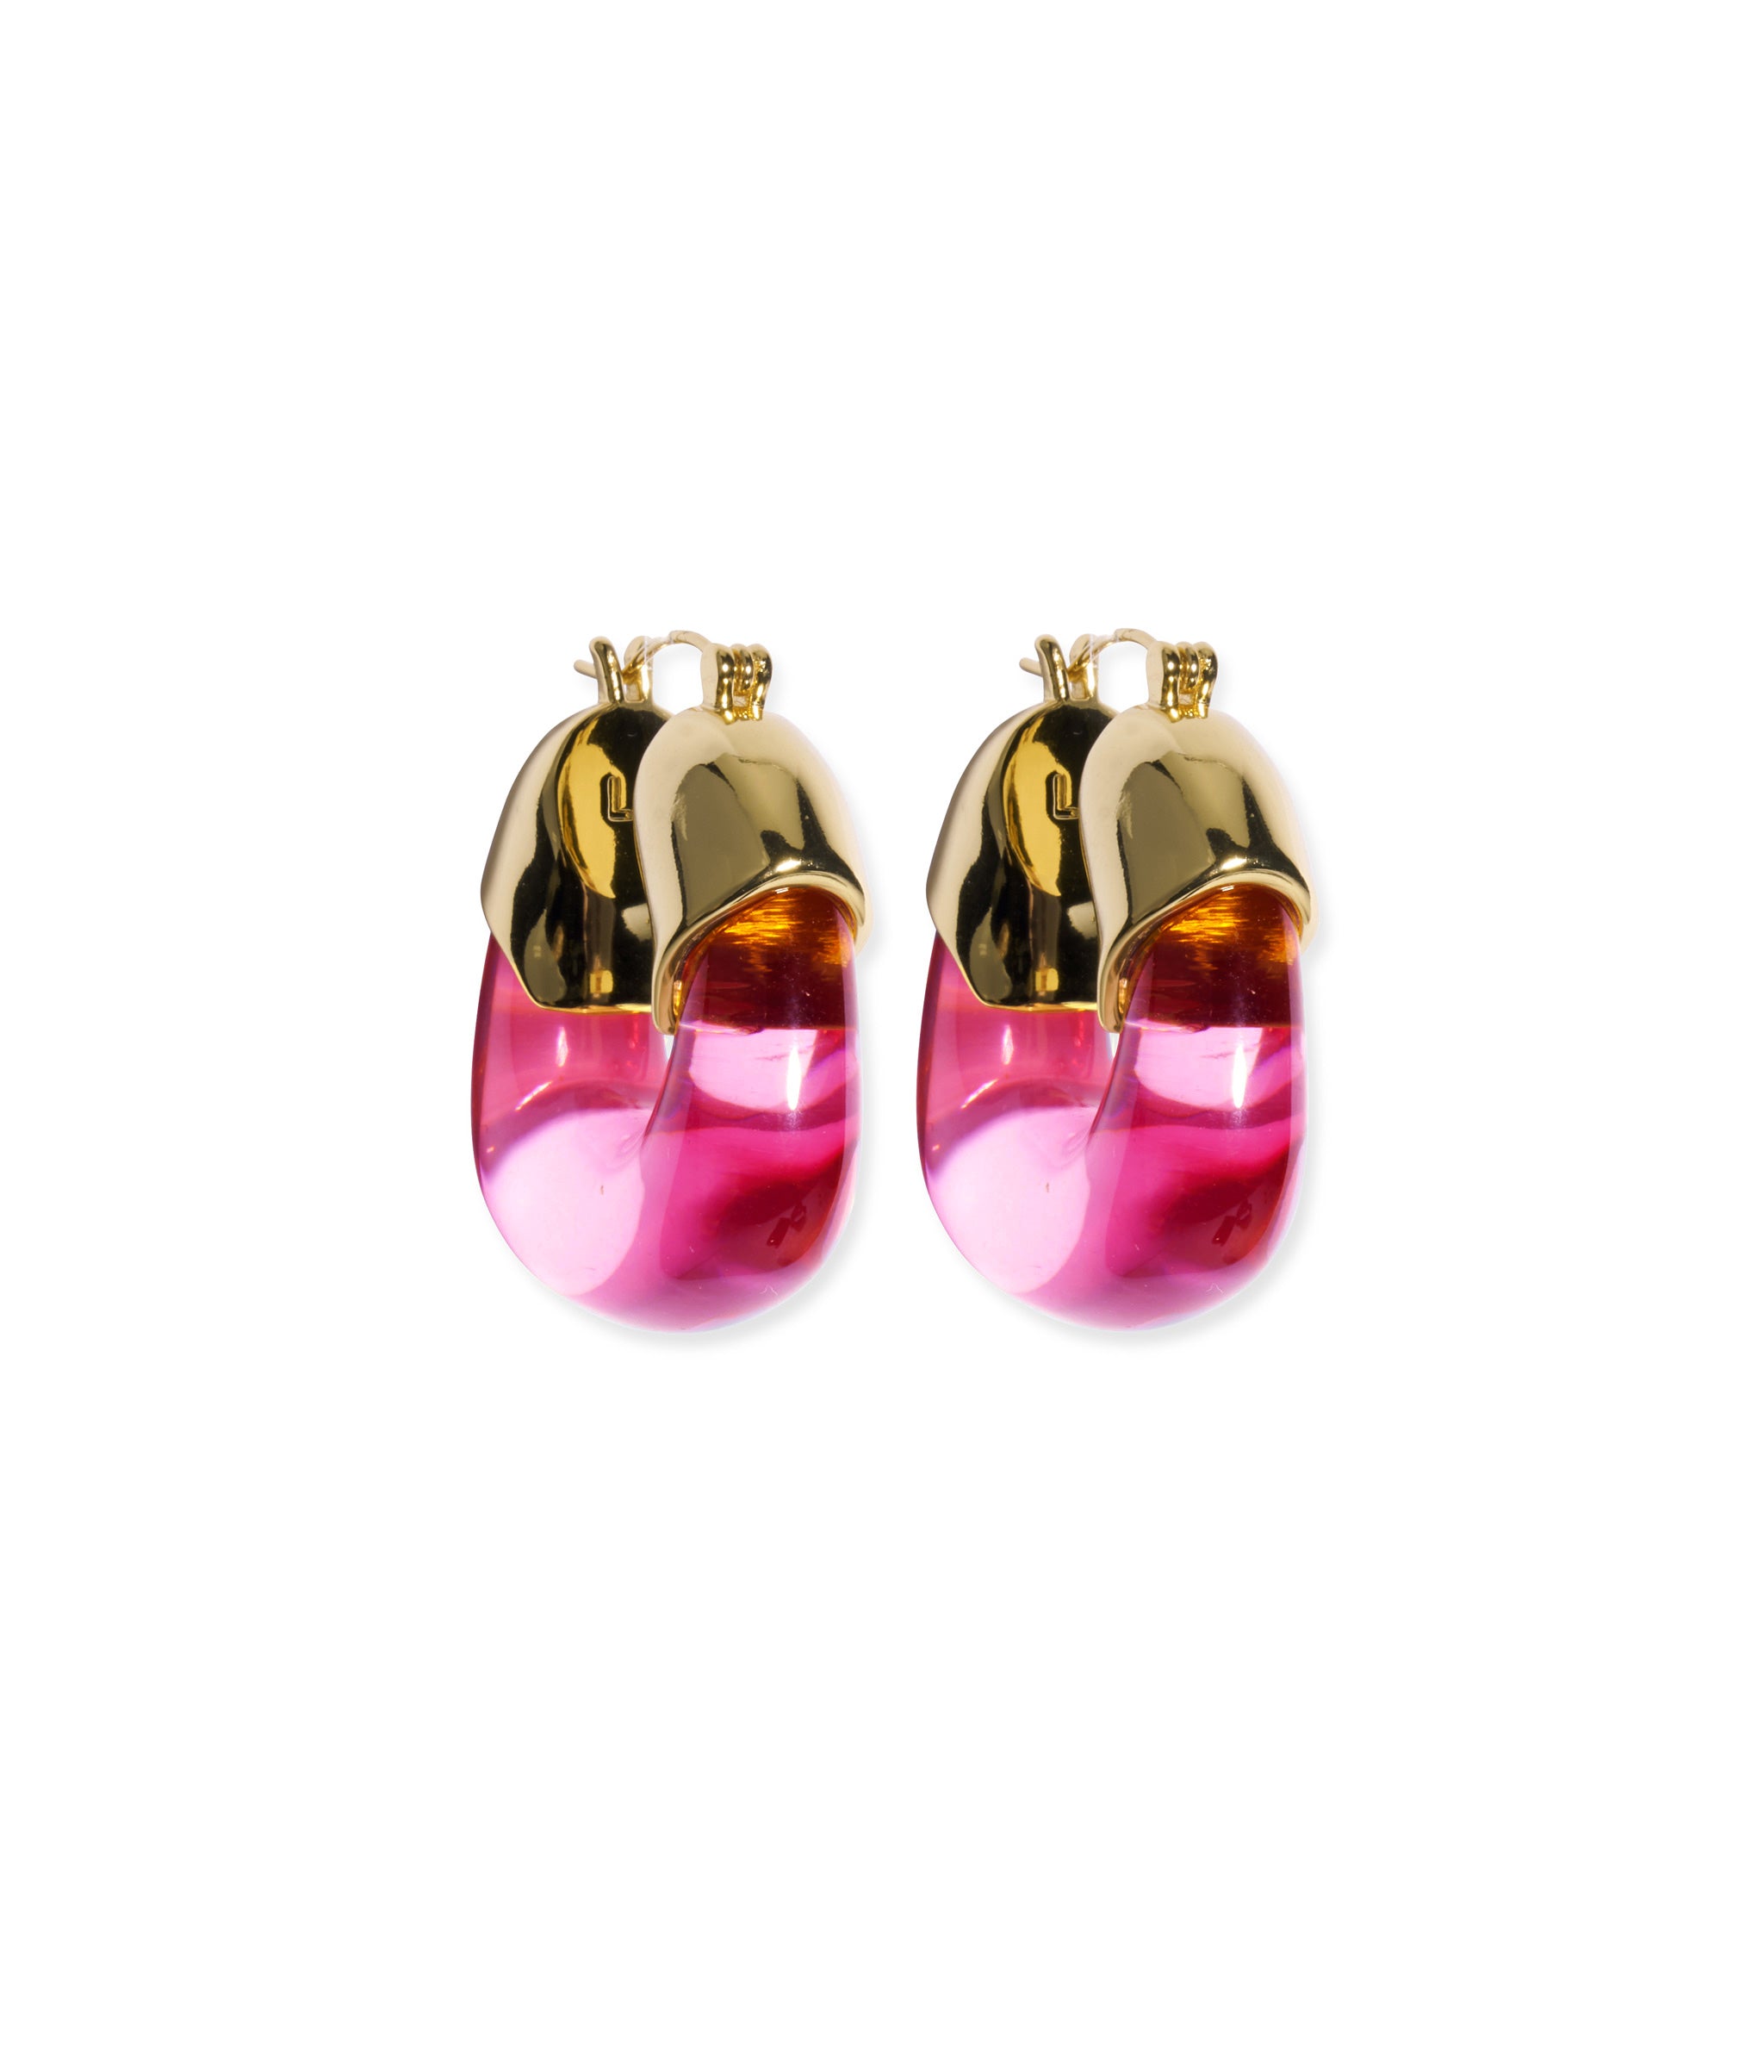 Organic Hoops in Flamingo. Gold plated hoop earrings with transparent bring pink-colored resin.